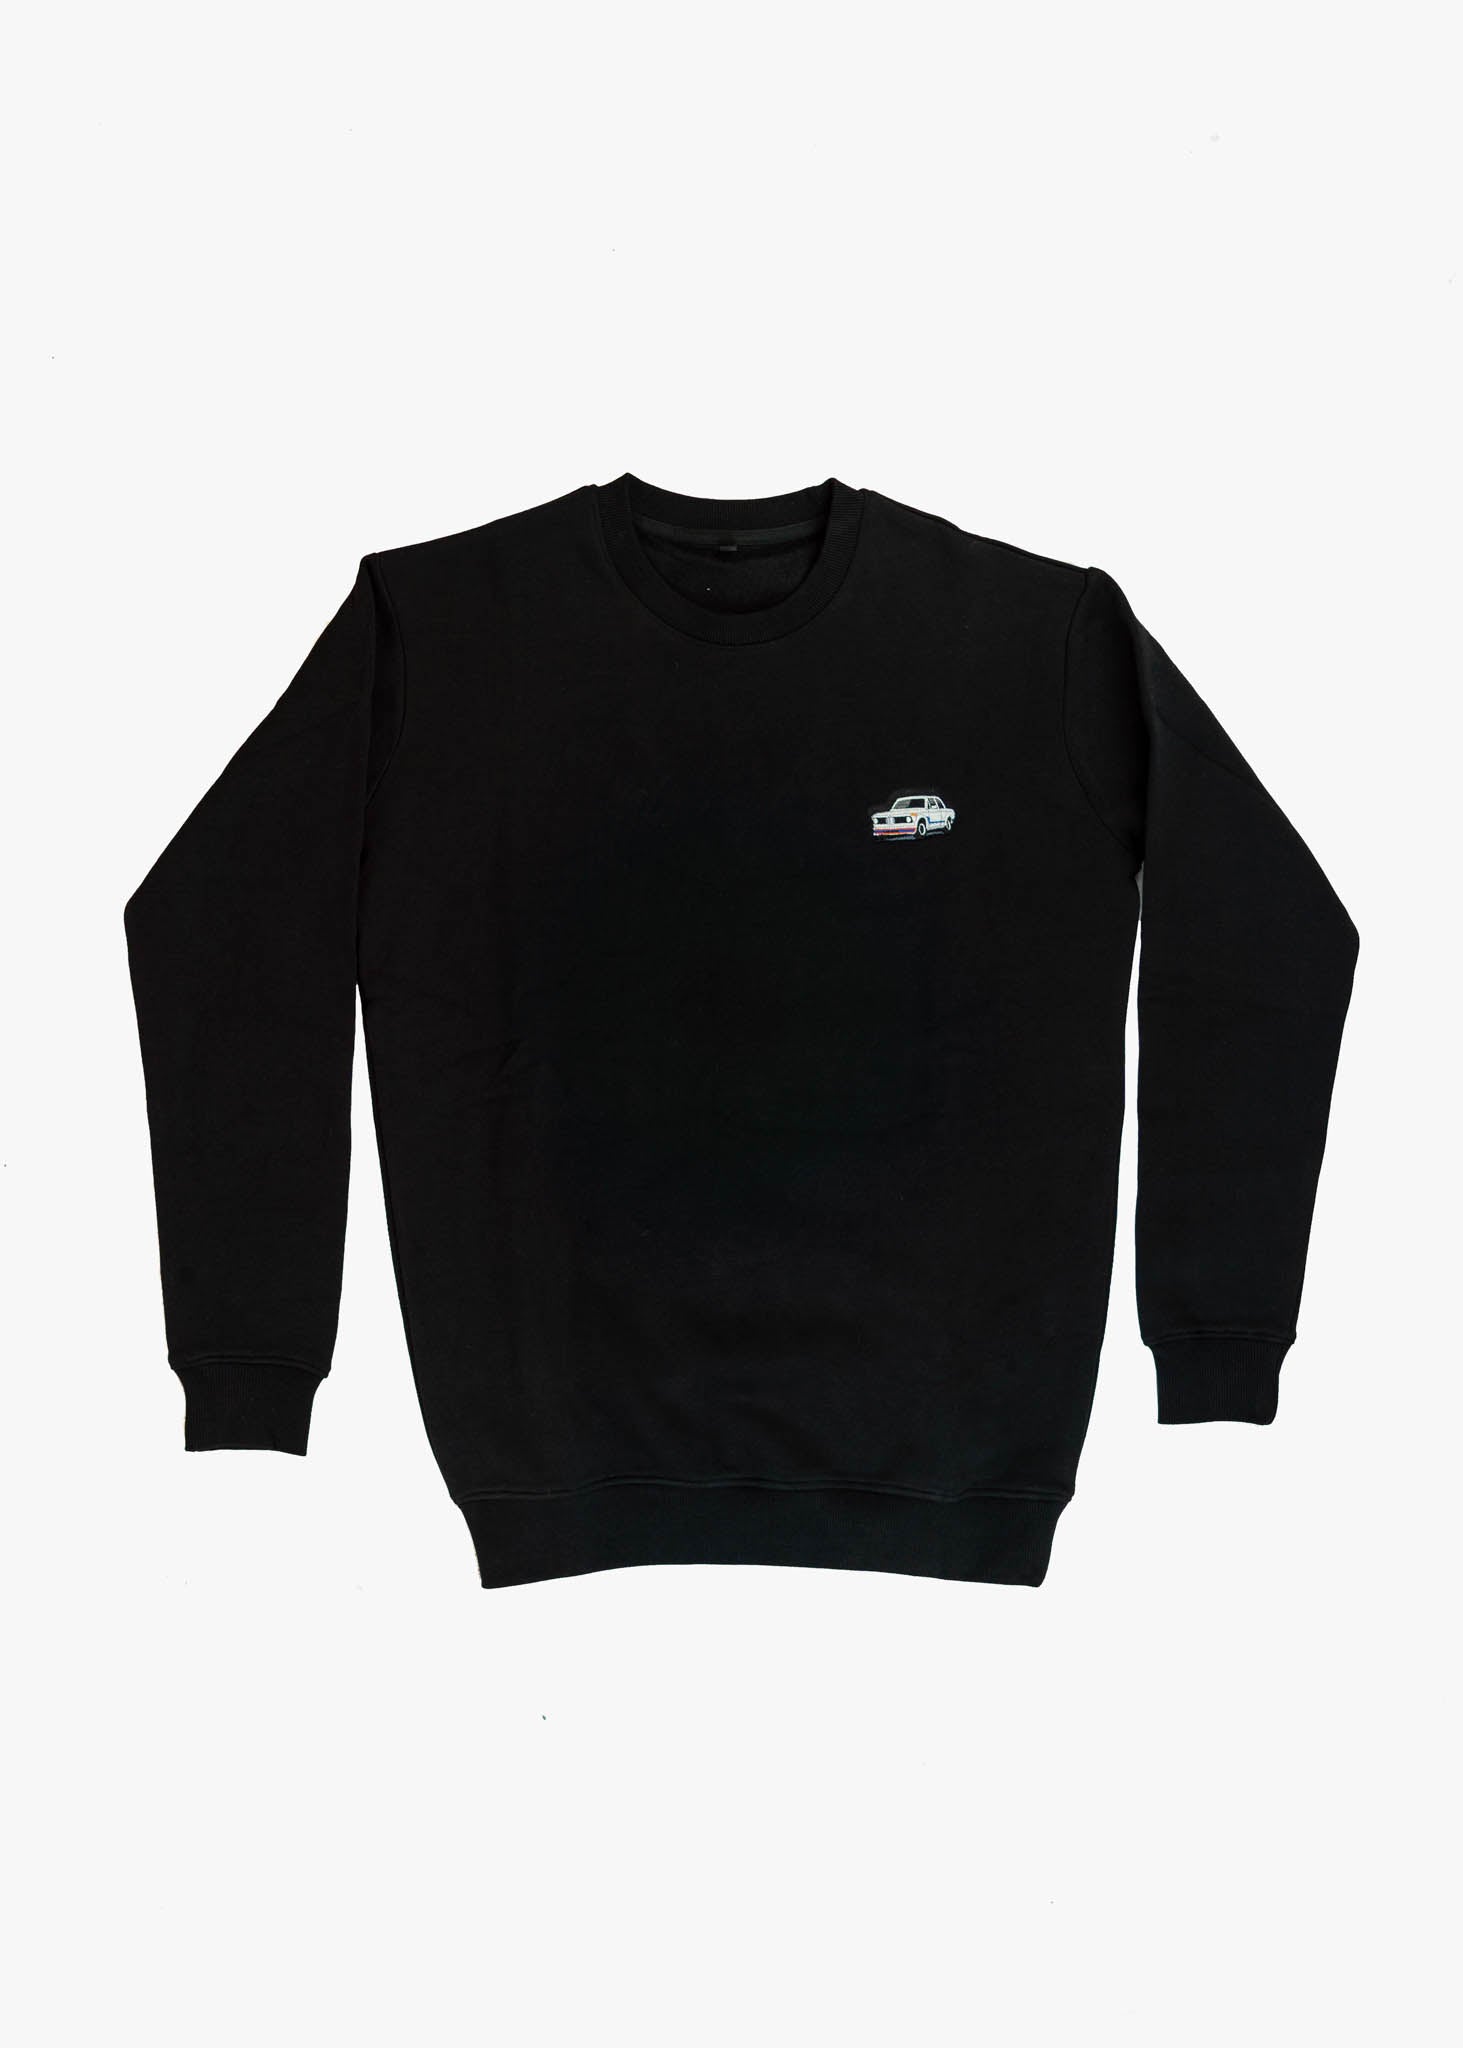 A black BMW crewneck sweater for men. Photo is the front of the sweater with an embroidered BMW 2002 Turbo. Fabric is composed of high quality 80% cotton, and 20% polyester and fits to size. The style is long sleeve, crew neck, and embroidery on left chest.